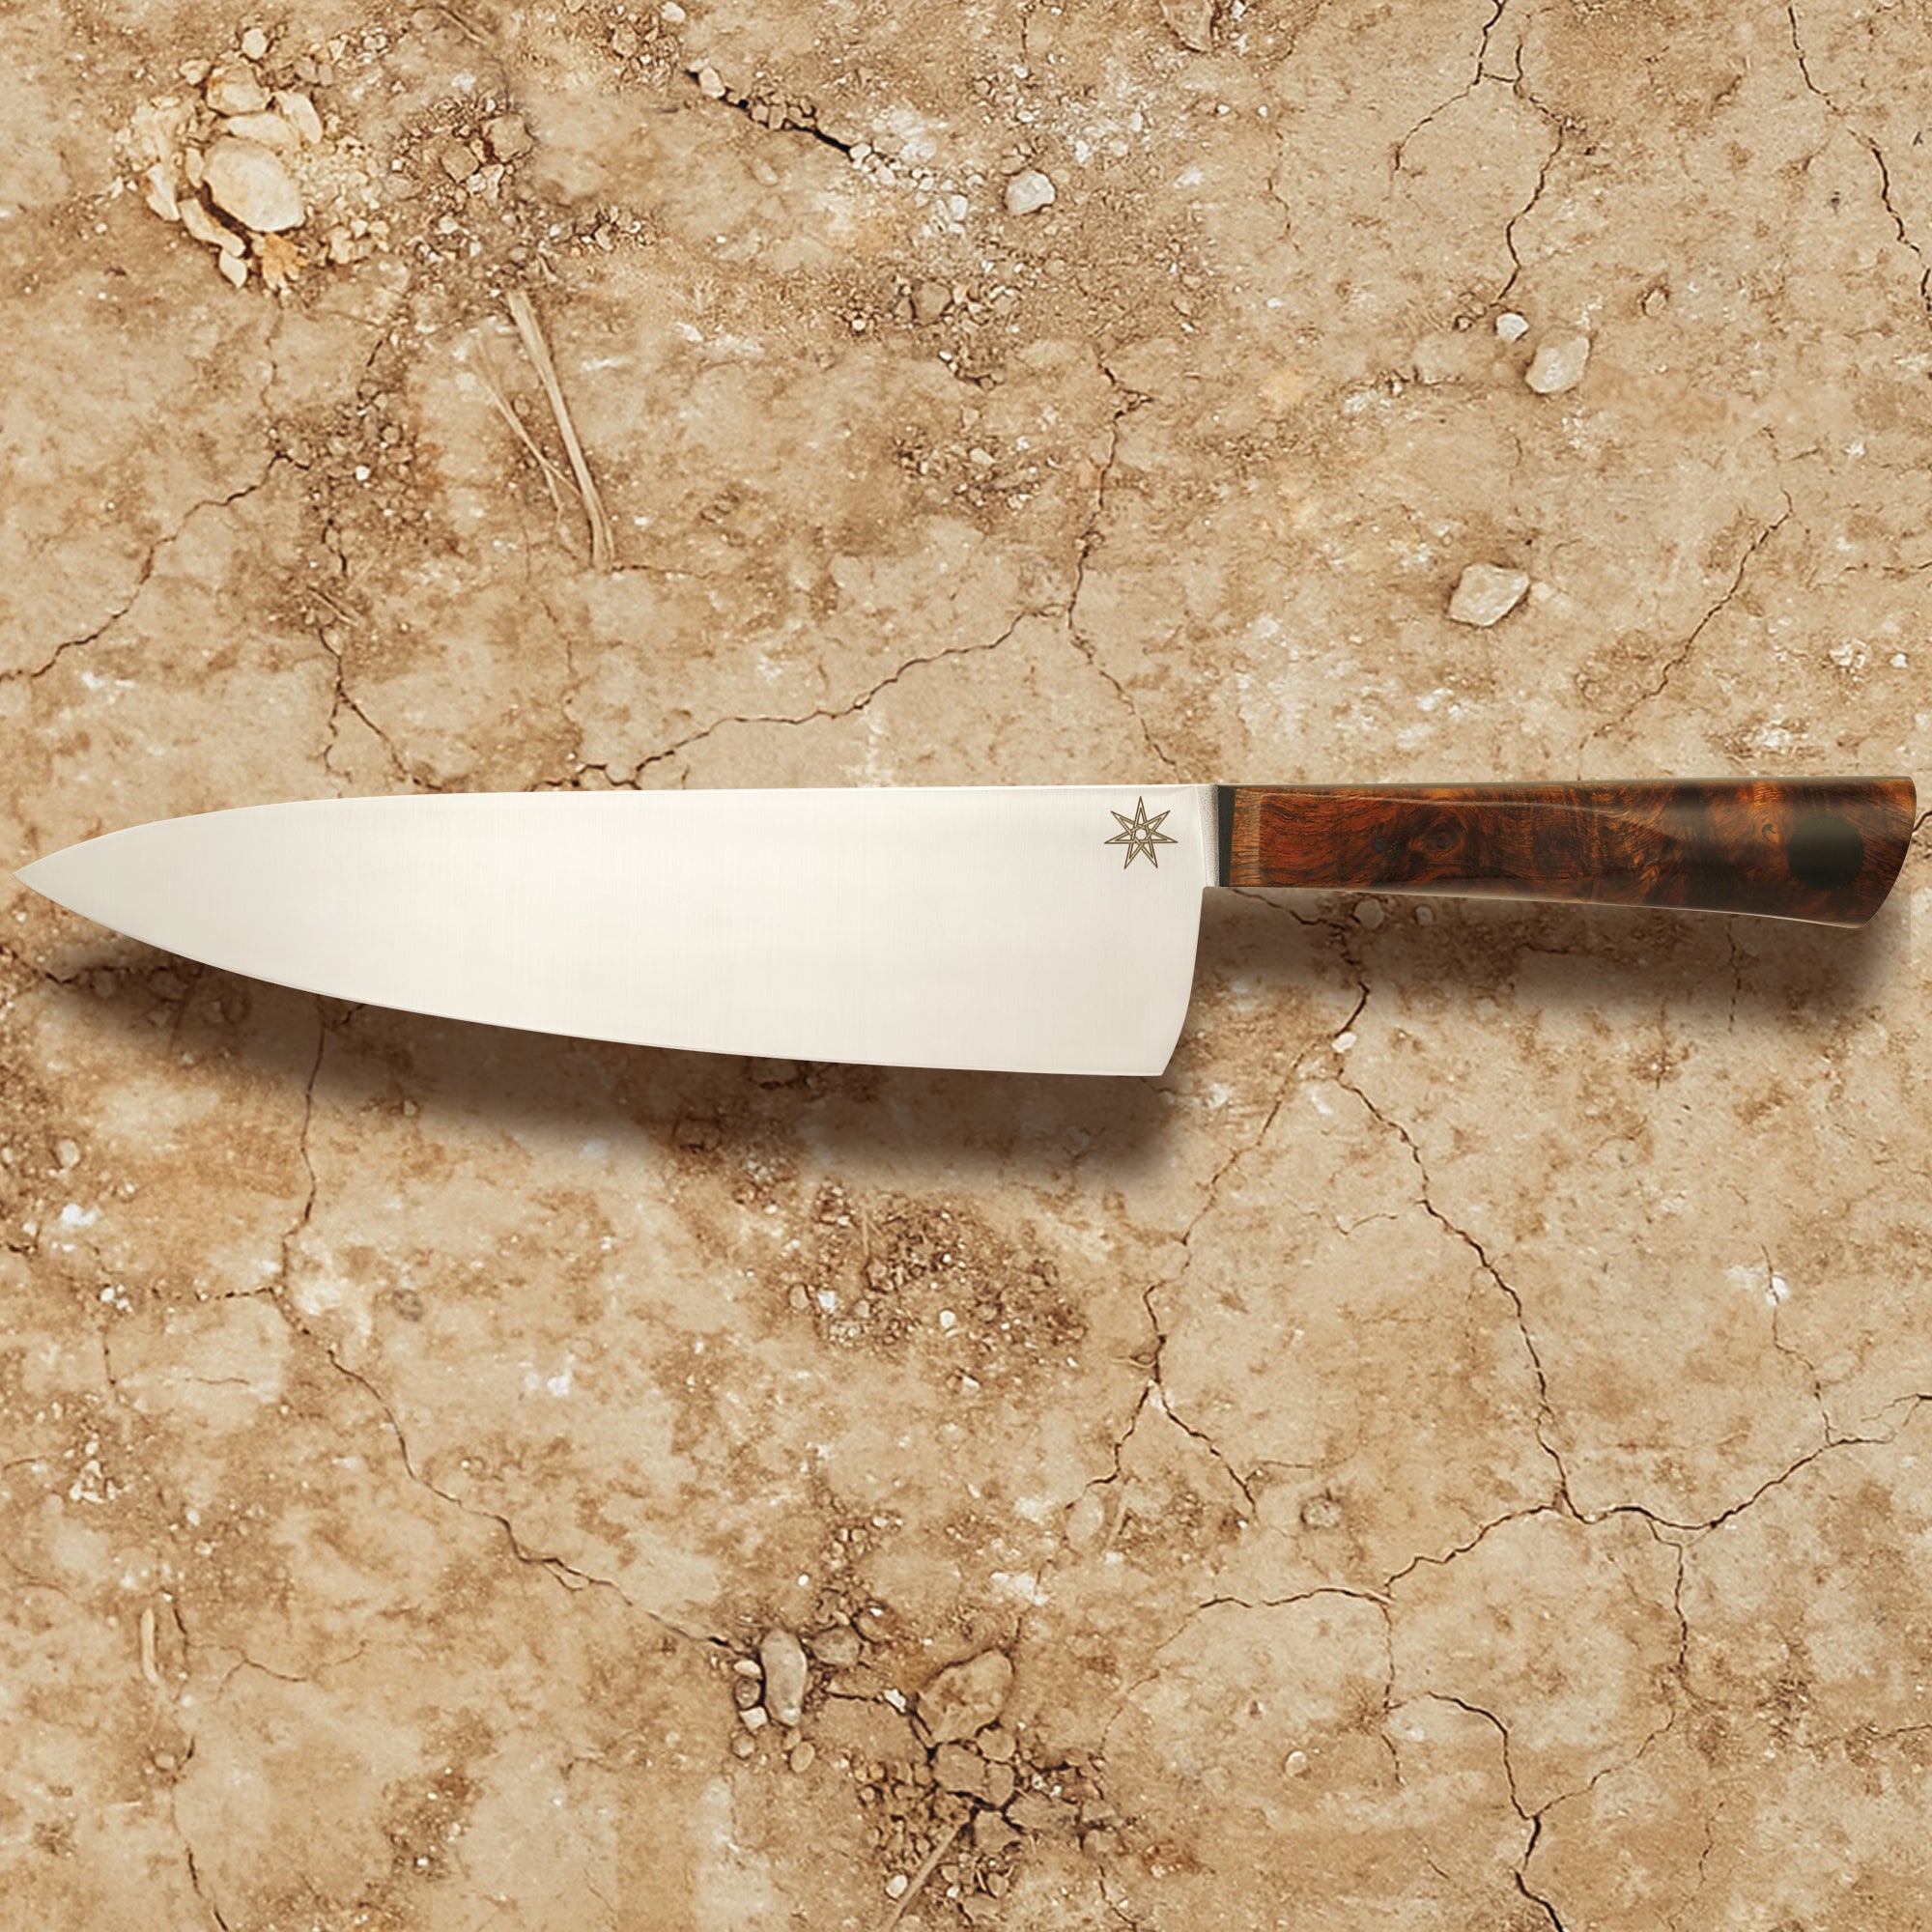 Town Cutler Olneya 8.5" Chef Knife with laser engraving on Nitro V stainless steel blade and Ironwood handle.